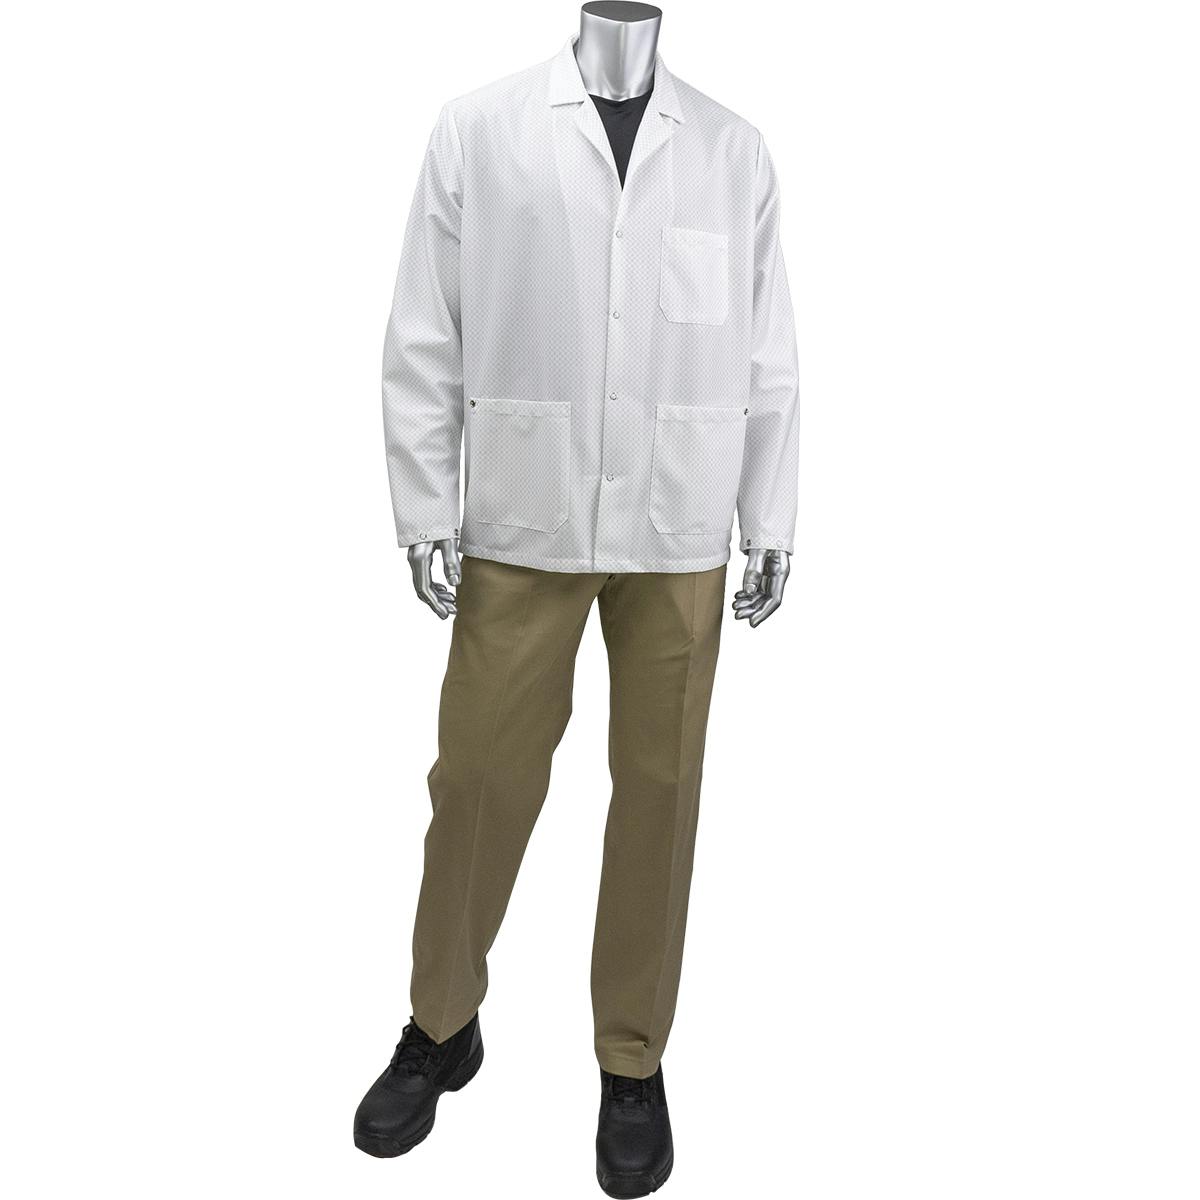 Staticon Short ESD Labcoat, White (BR16-45WH)